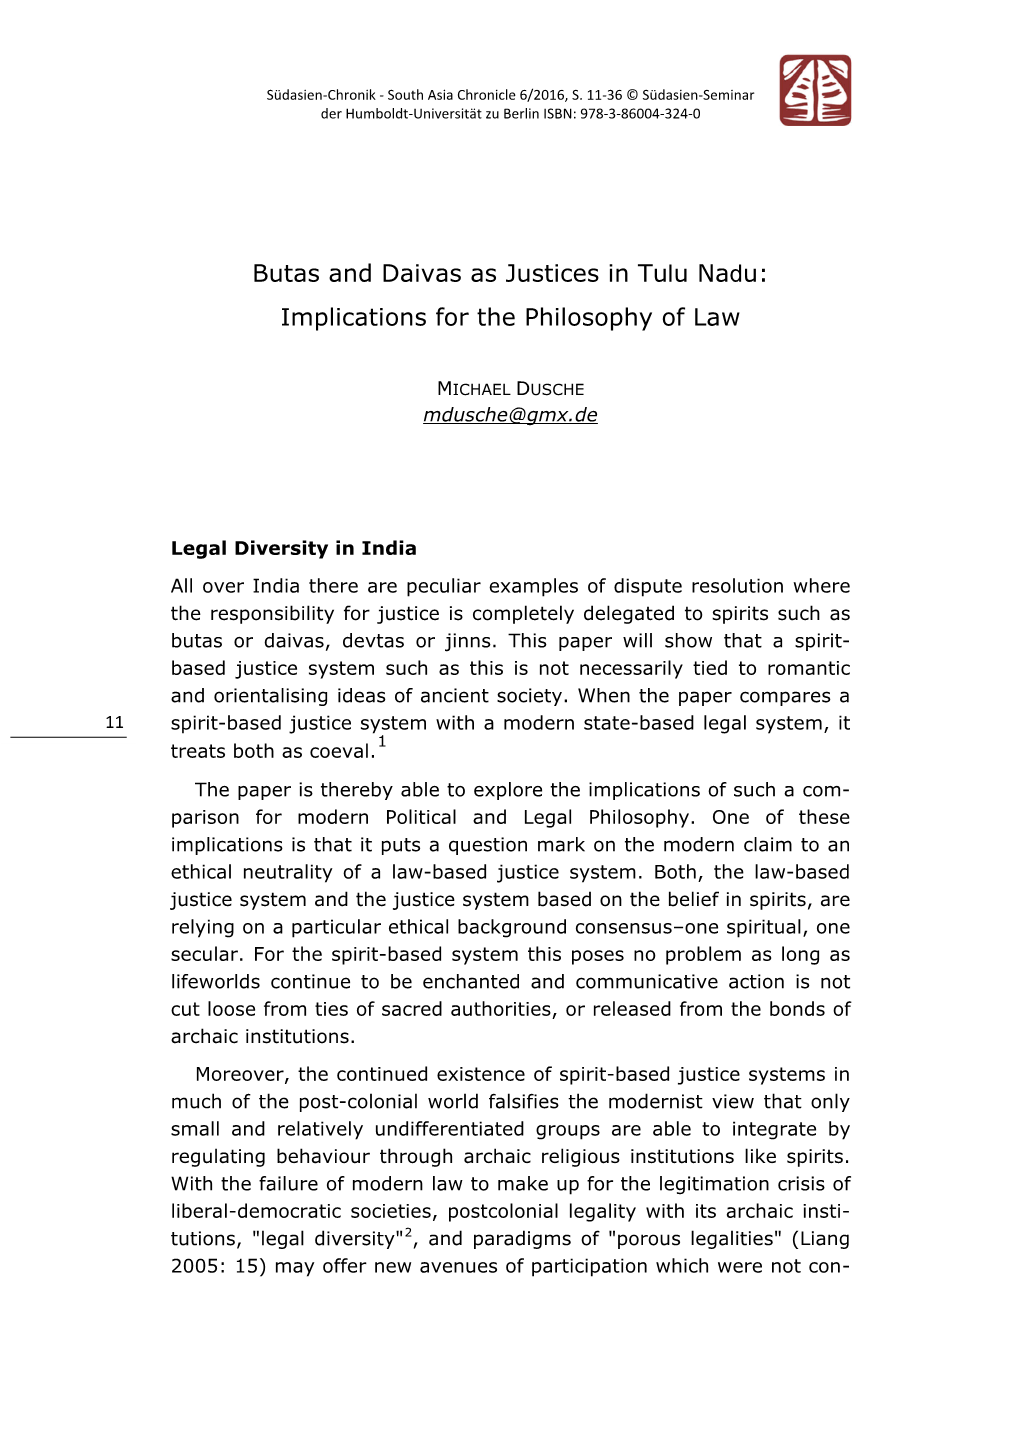 Butas and Daivas As Justices in Tulu Nadu: Implications for the Philosophy of Law